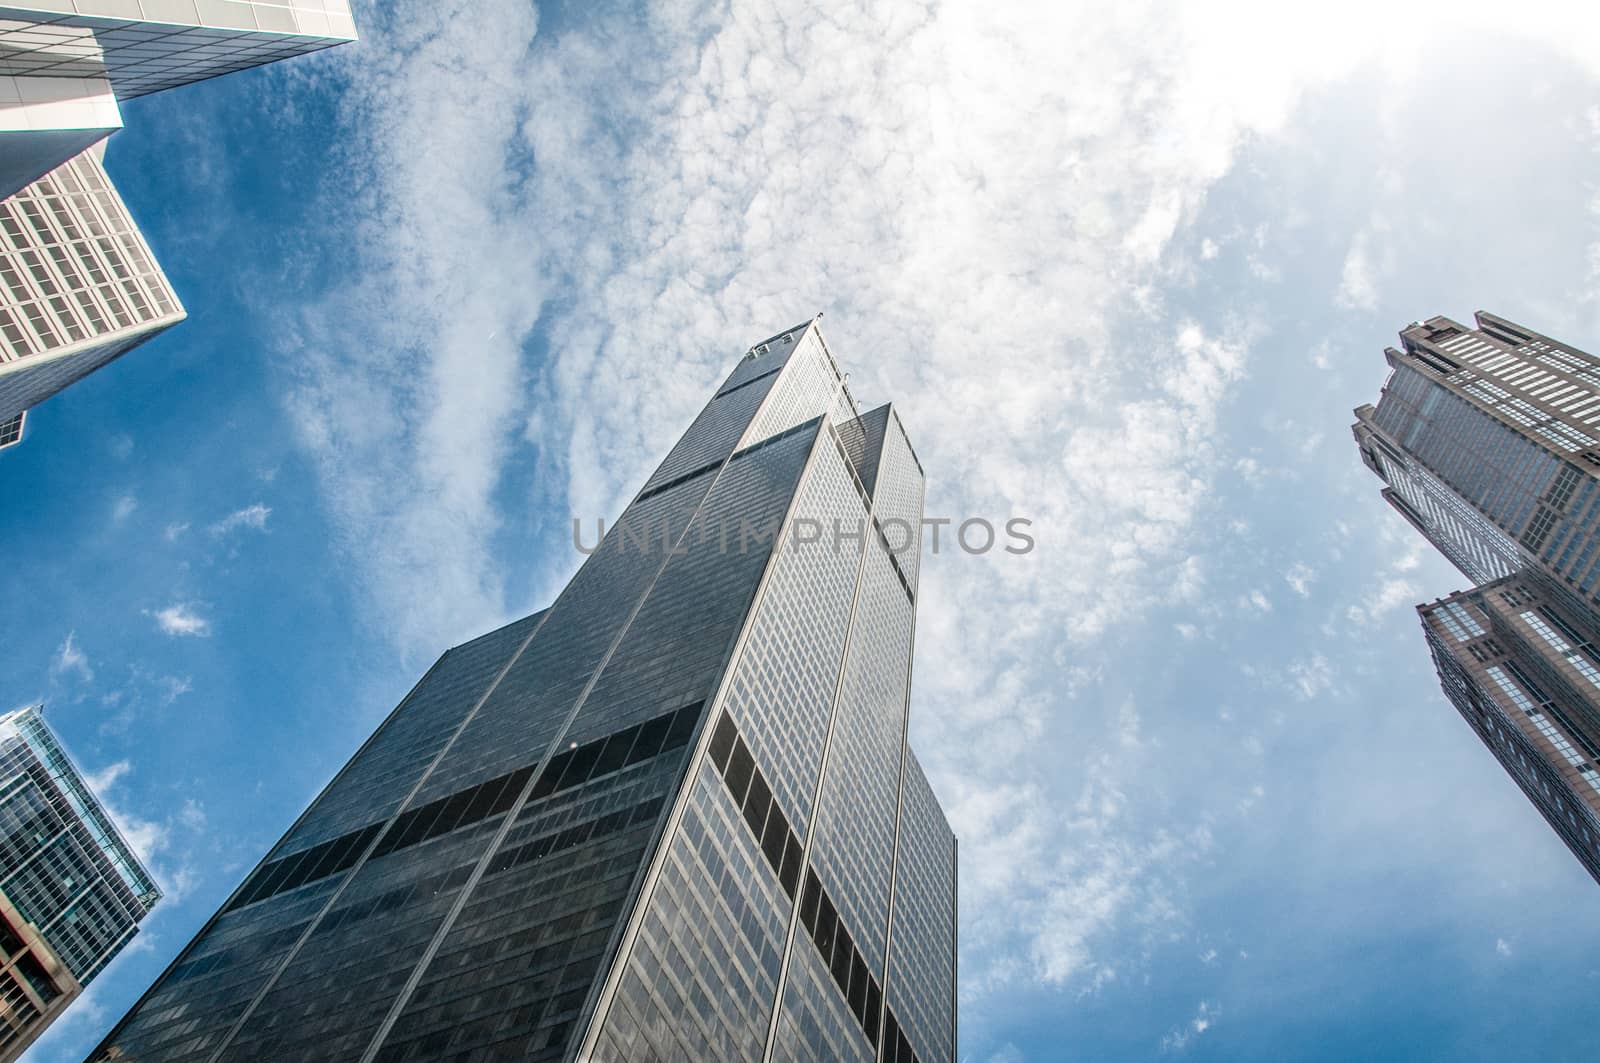 Sears Willis tower by CHR1